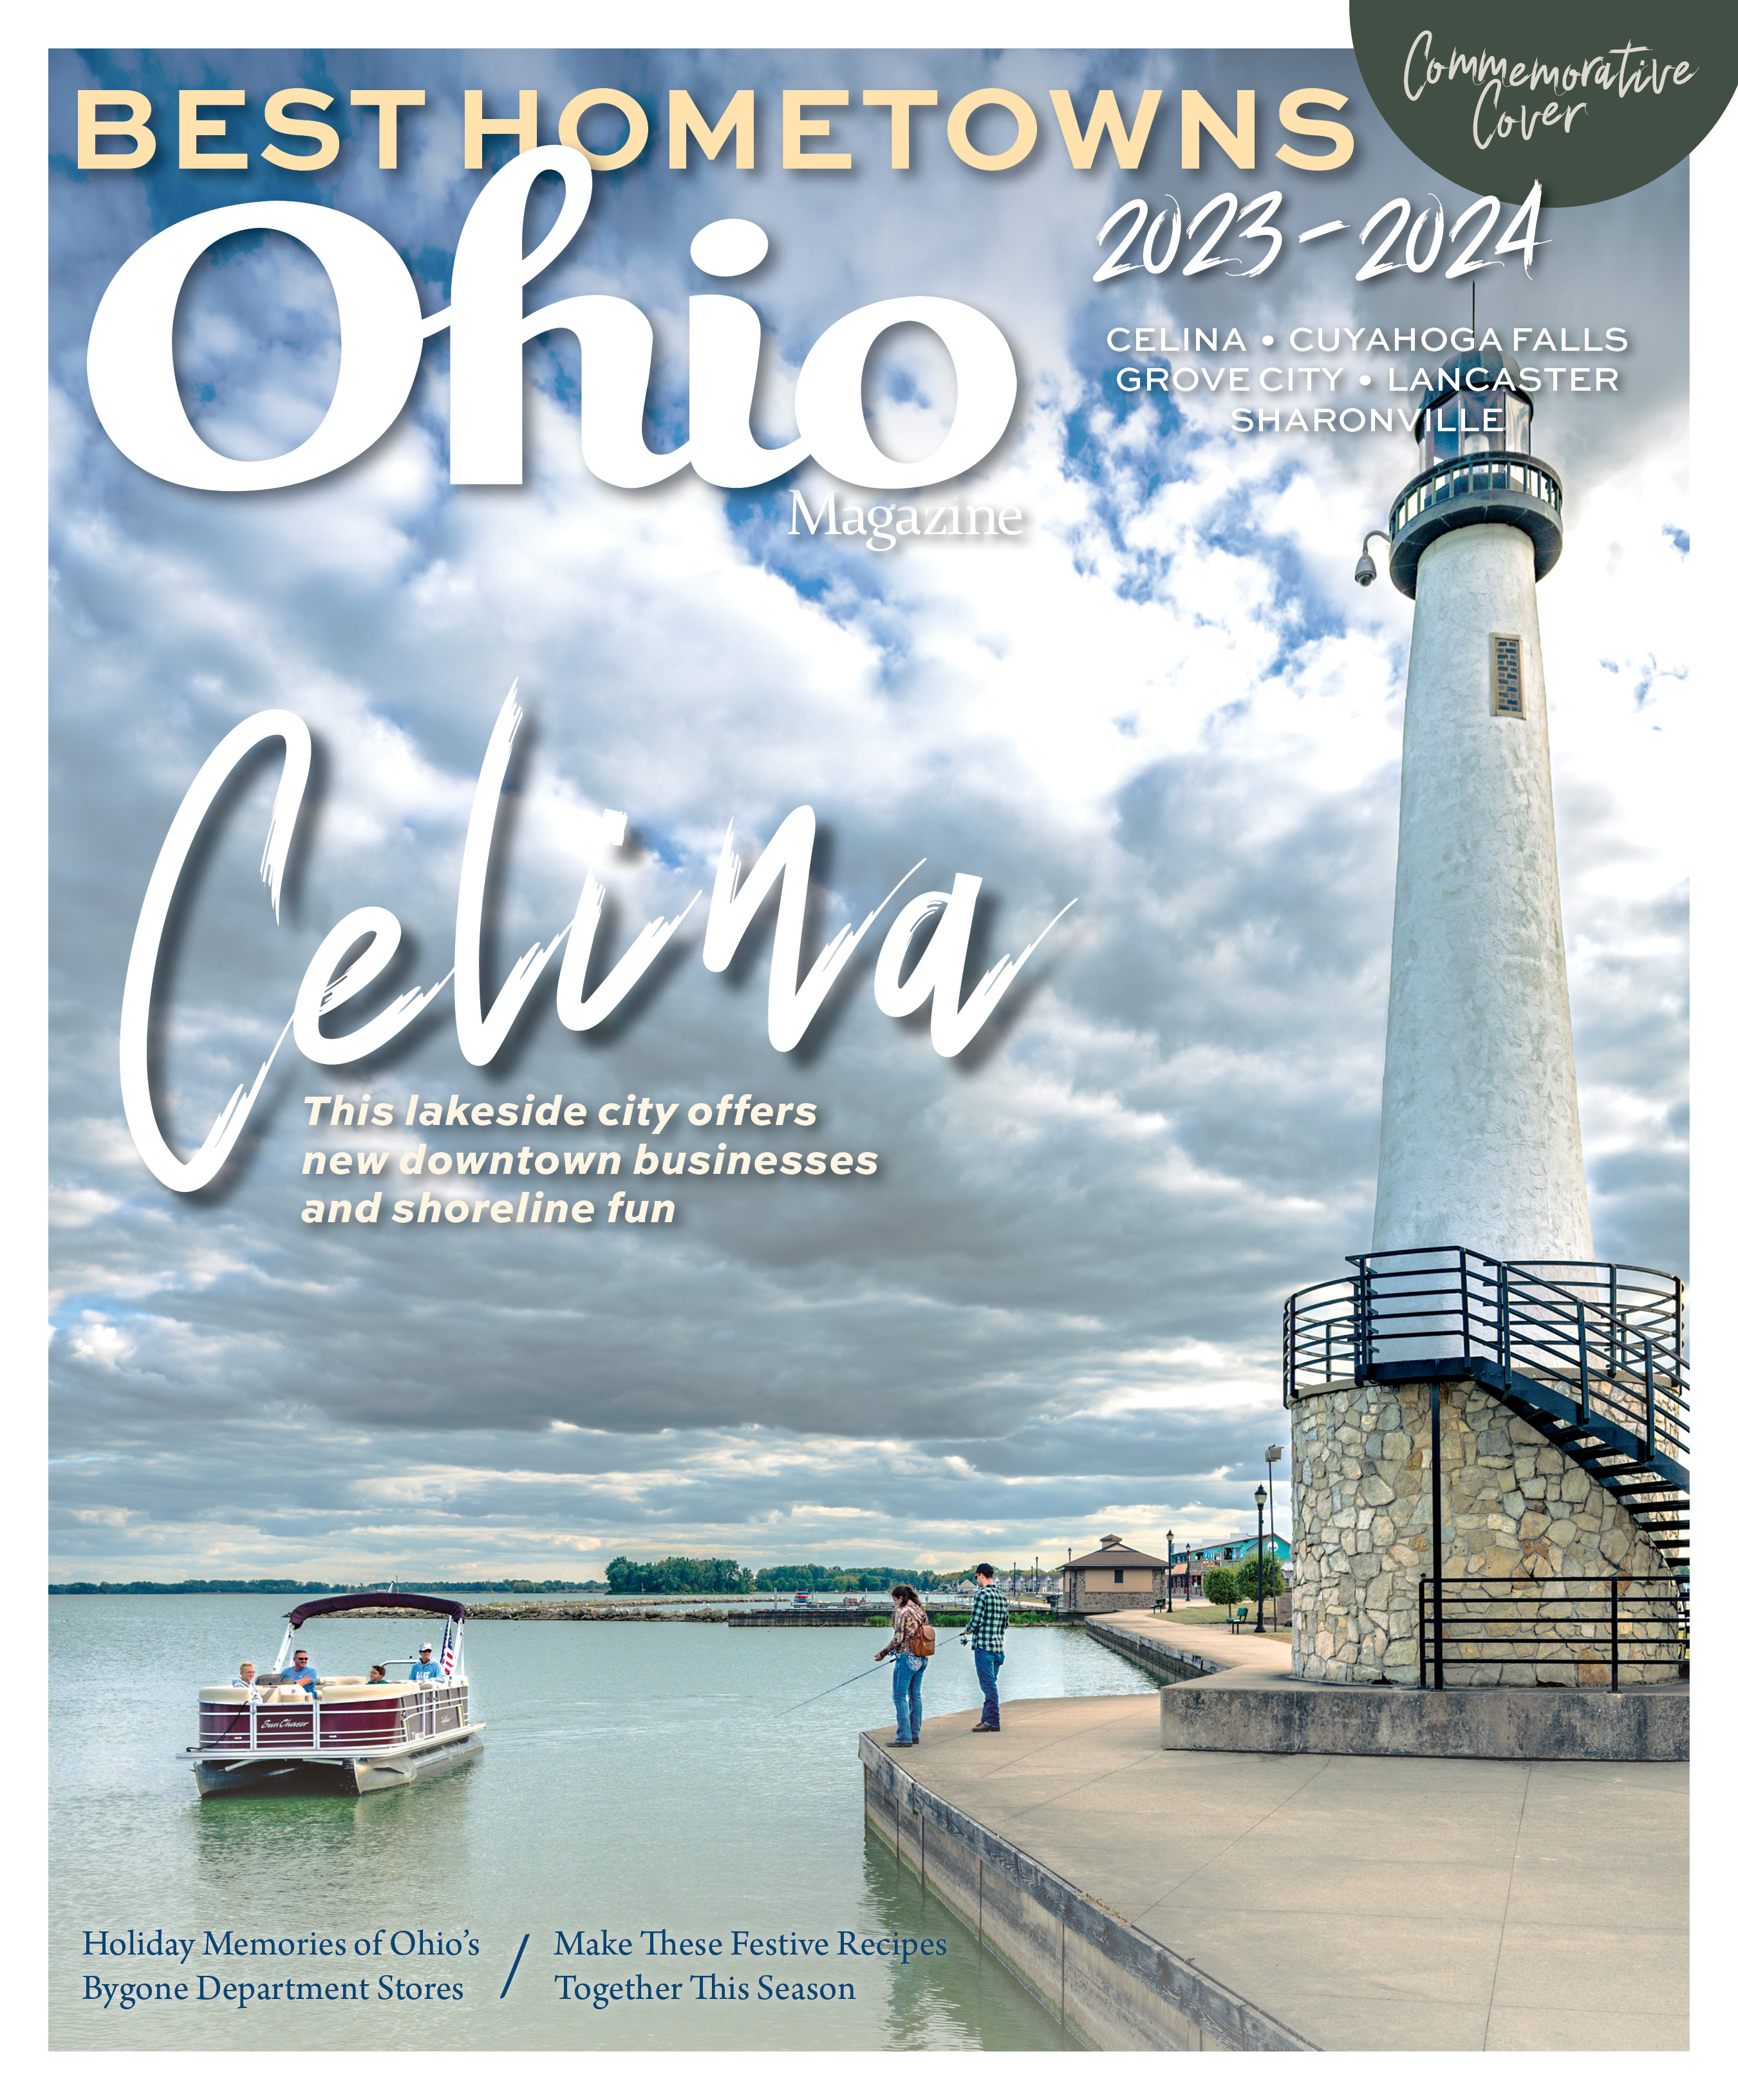 Best Hometowns 2023: Celina Cover